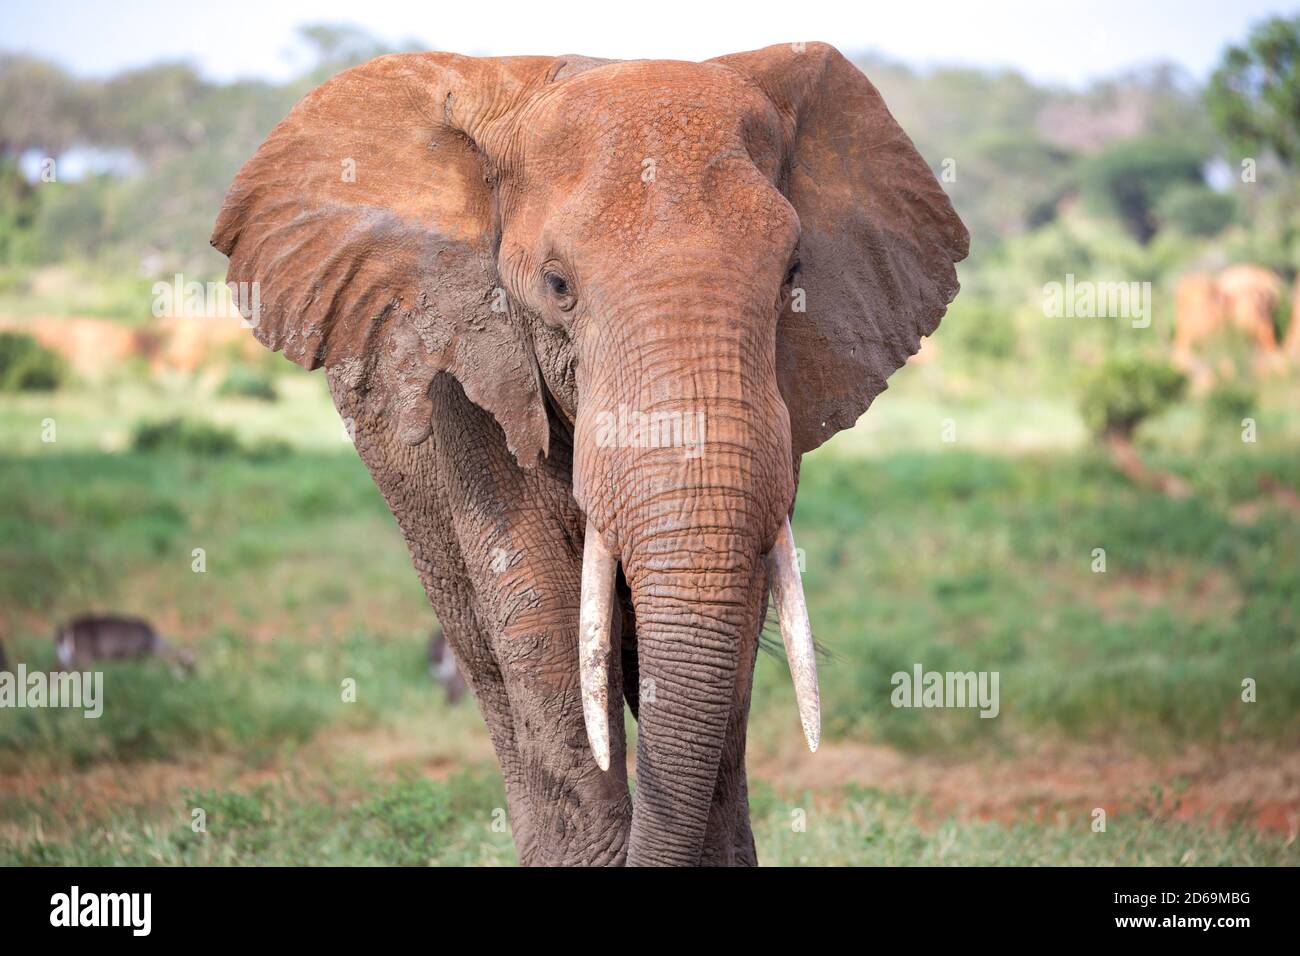 A face of a red elephant taken up close. Stock Photo